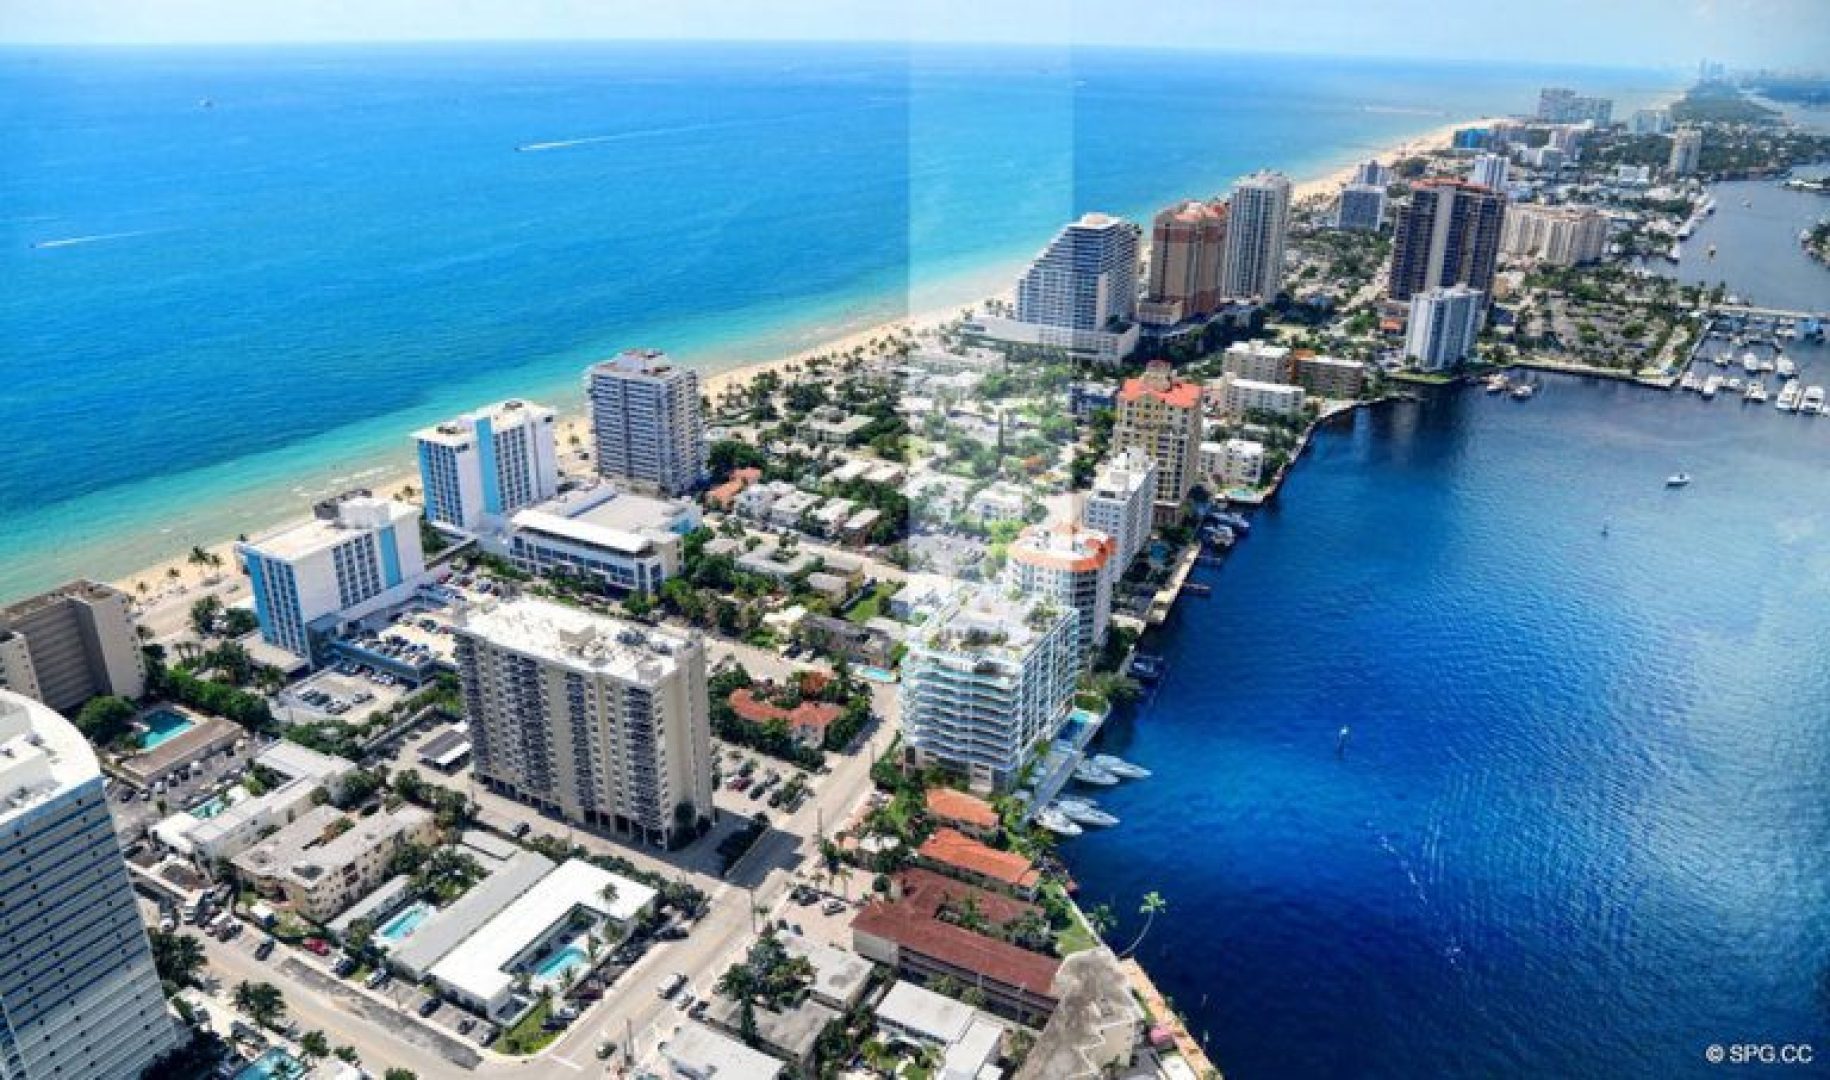 Southern View of 321 at Water's Edge, Luxury Waterfront Condos in Fort Lauderdale, Florida 33304